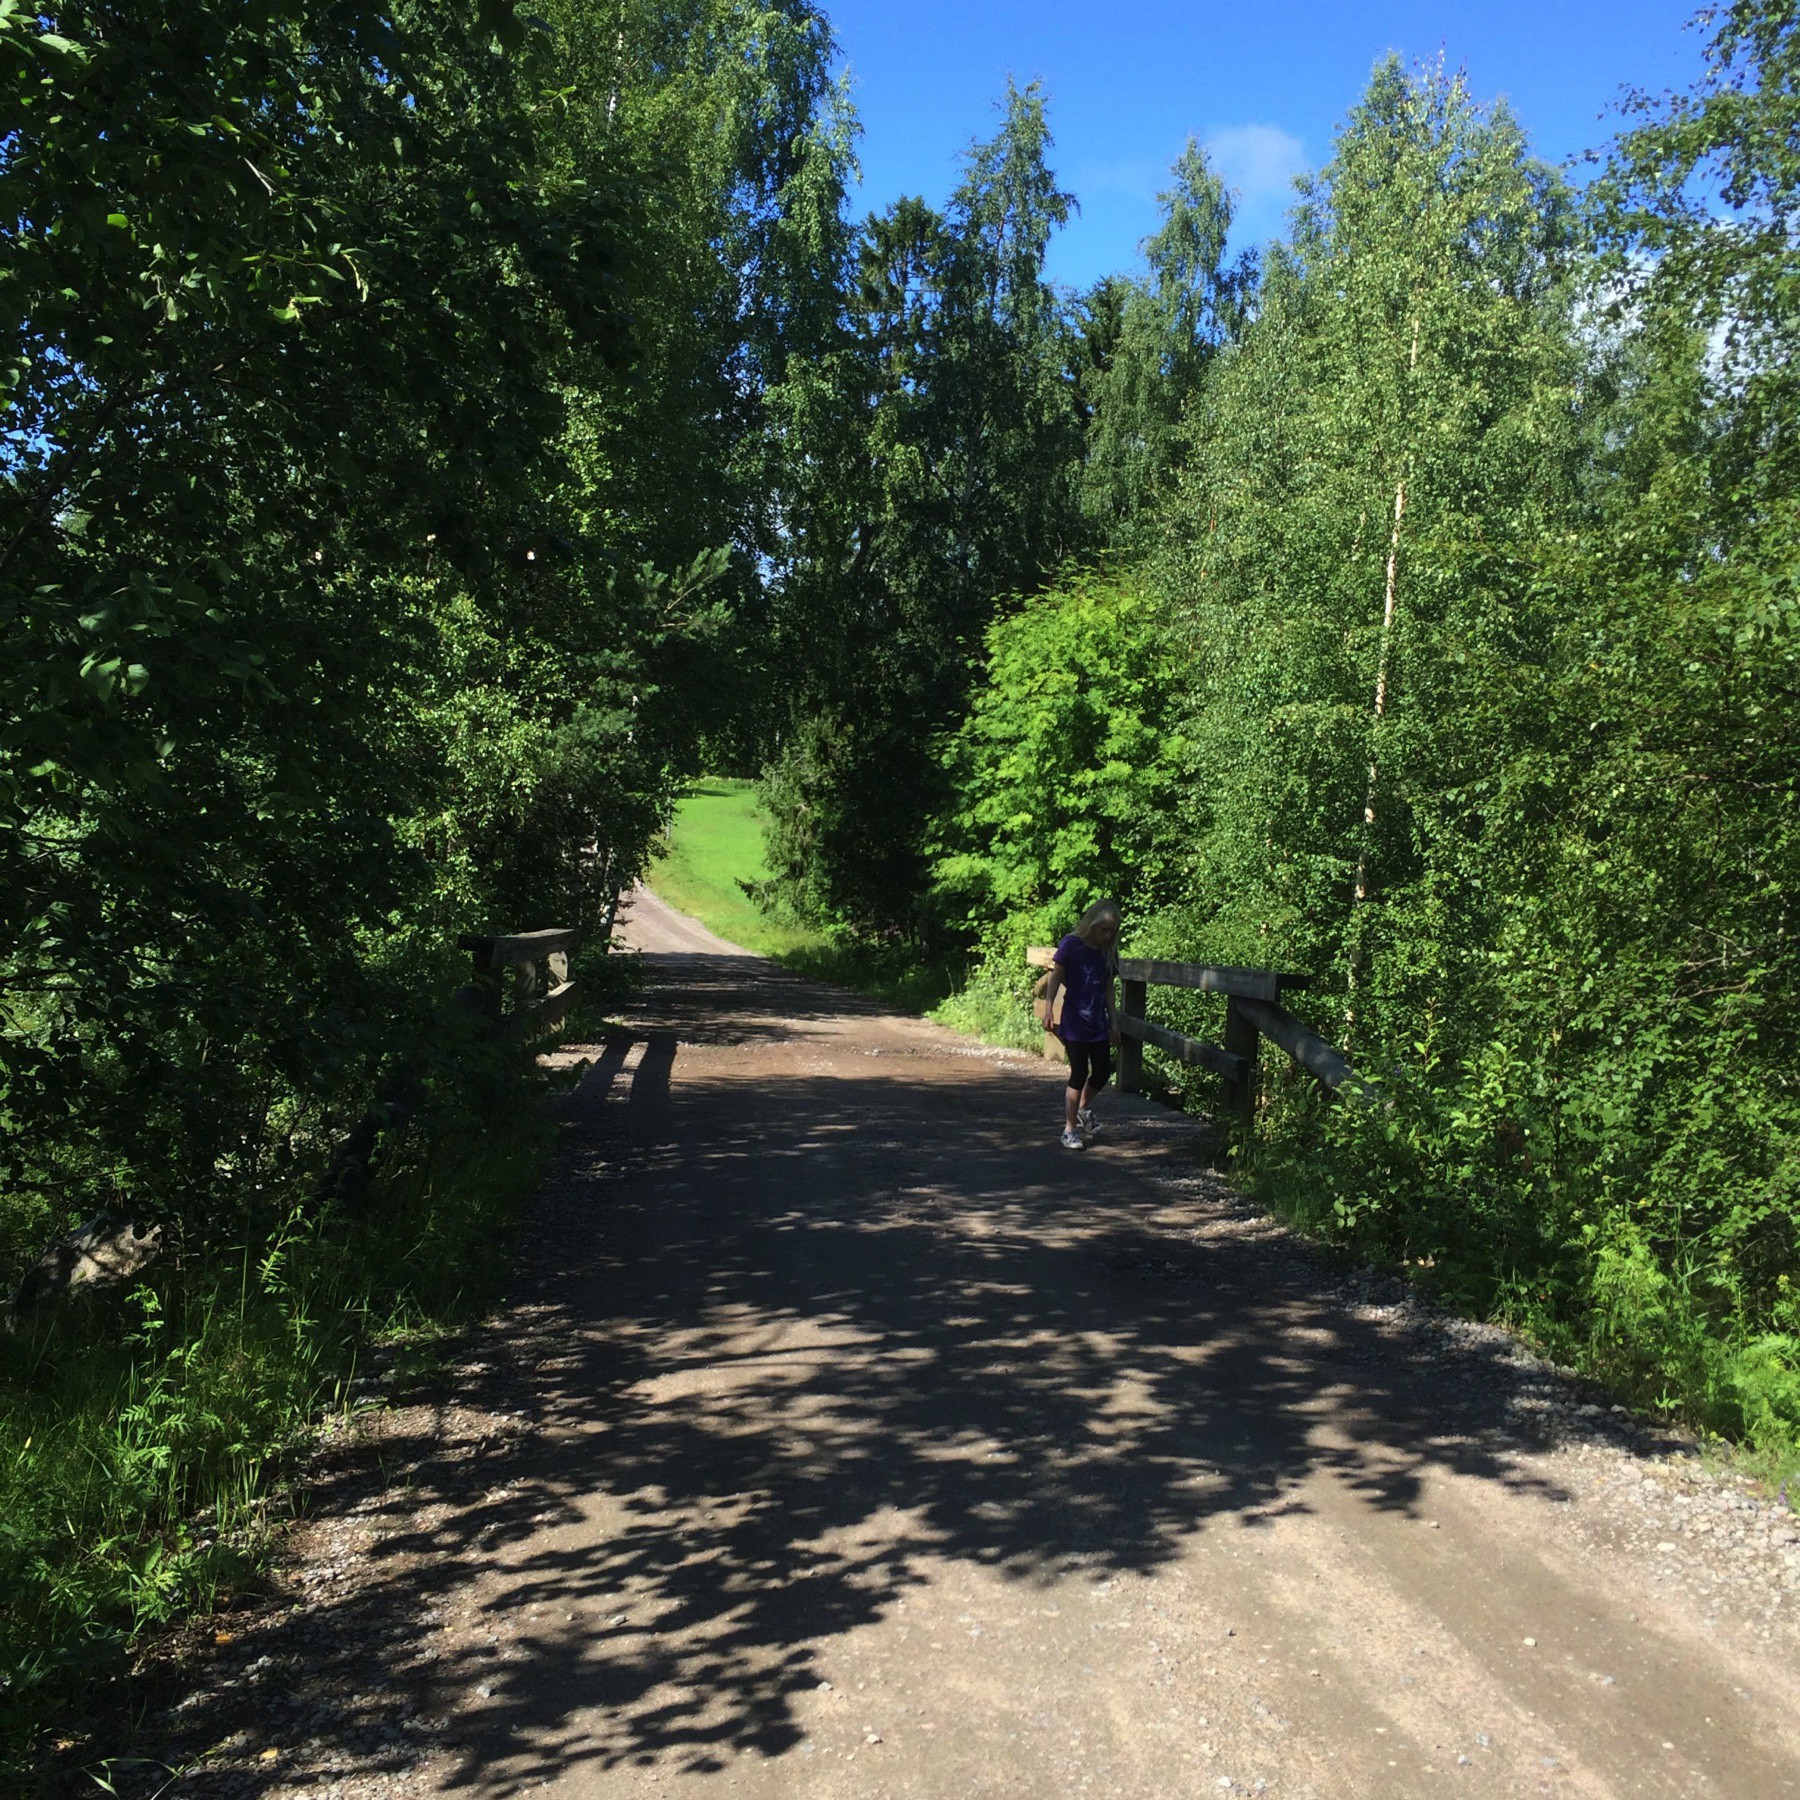 Summer photo of a dirt road, small wooden bridge and plenty of trees